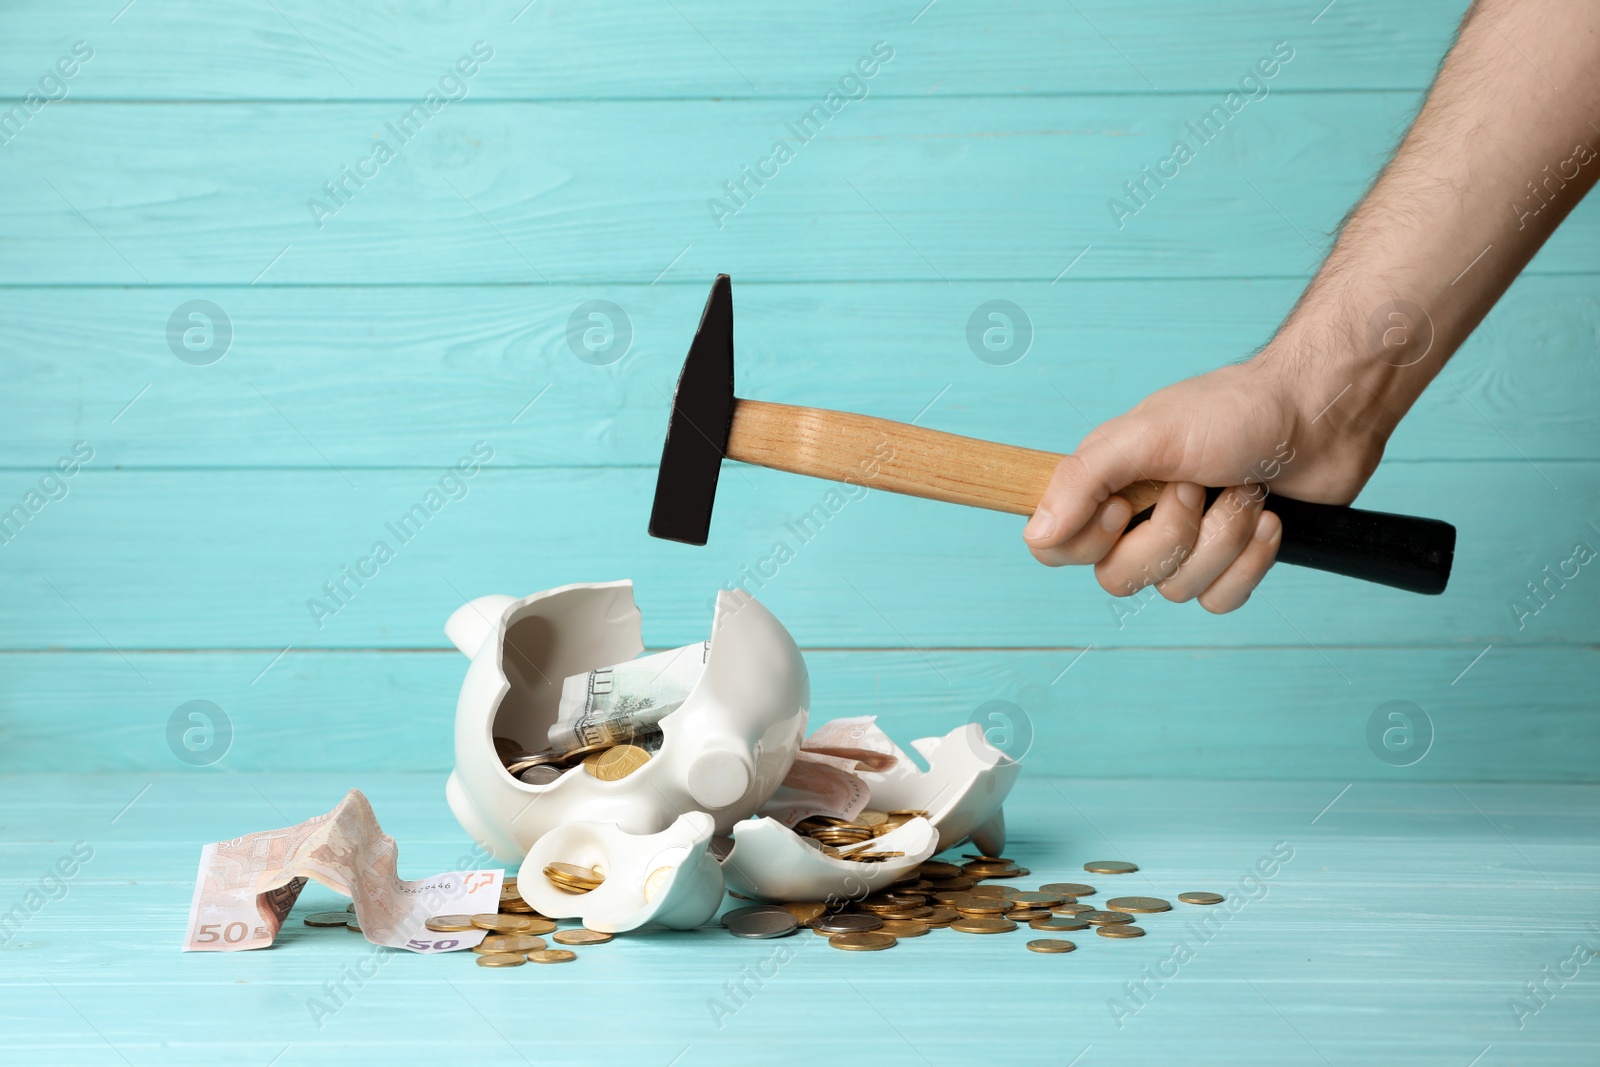 Photo of Man breaking piggy bank with hammer on table